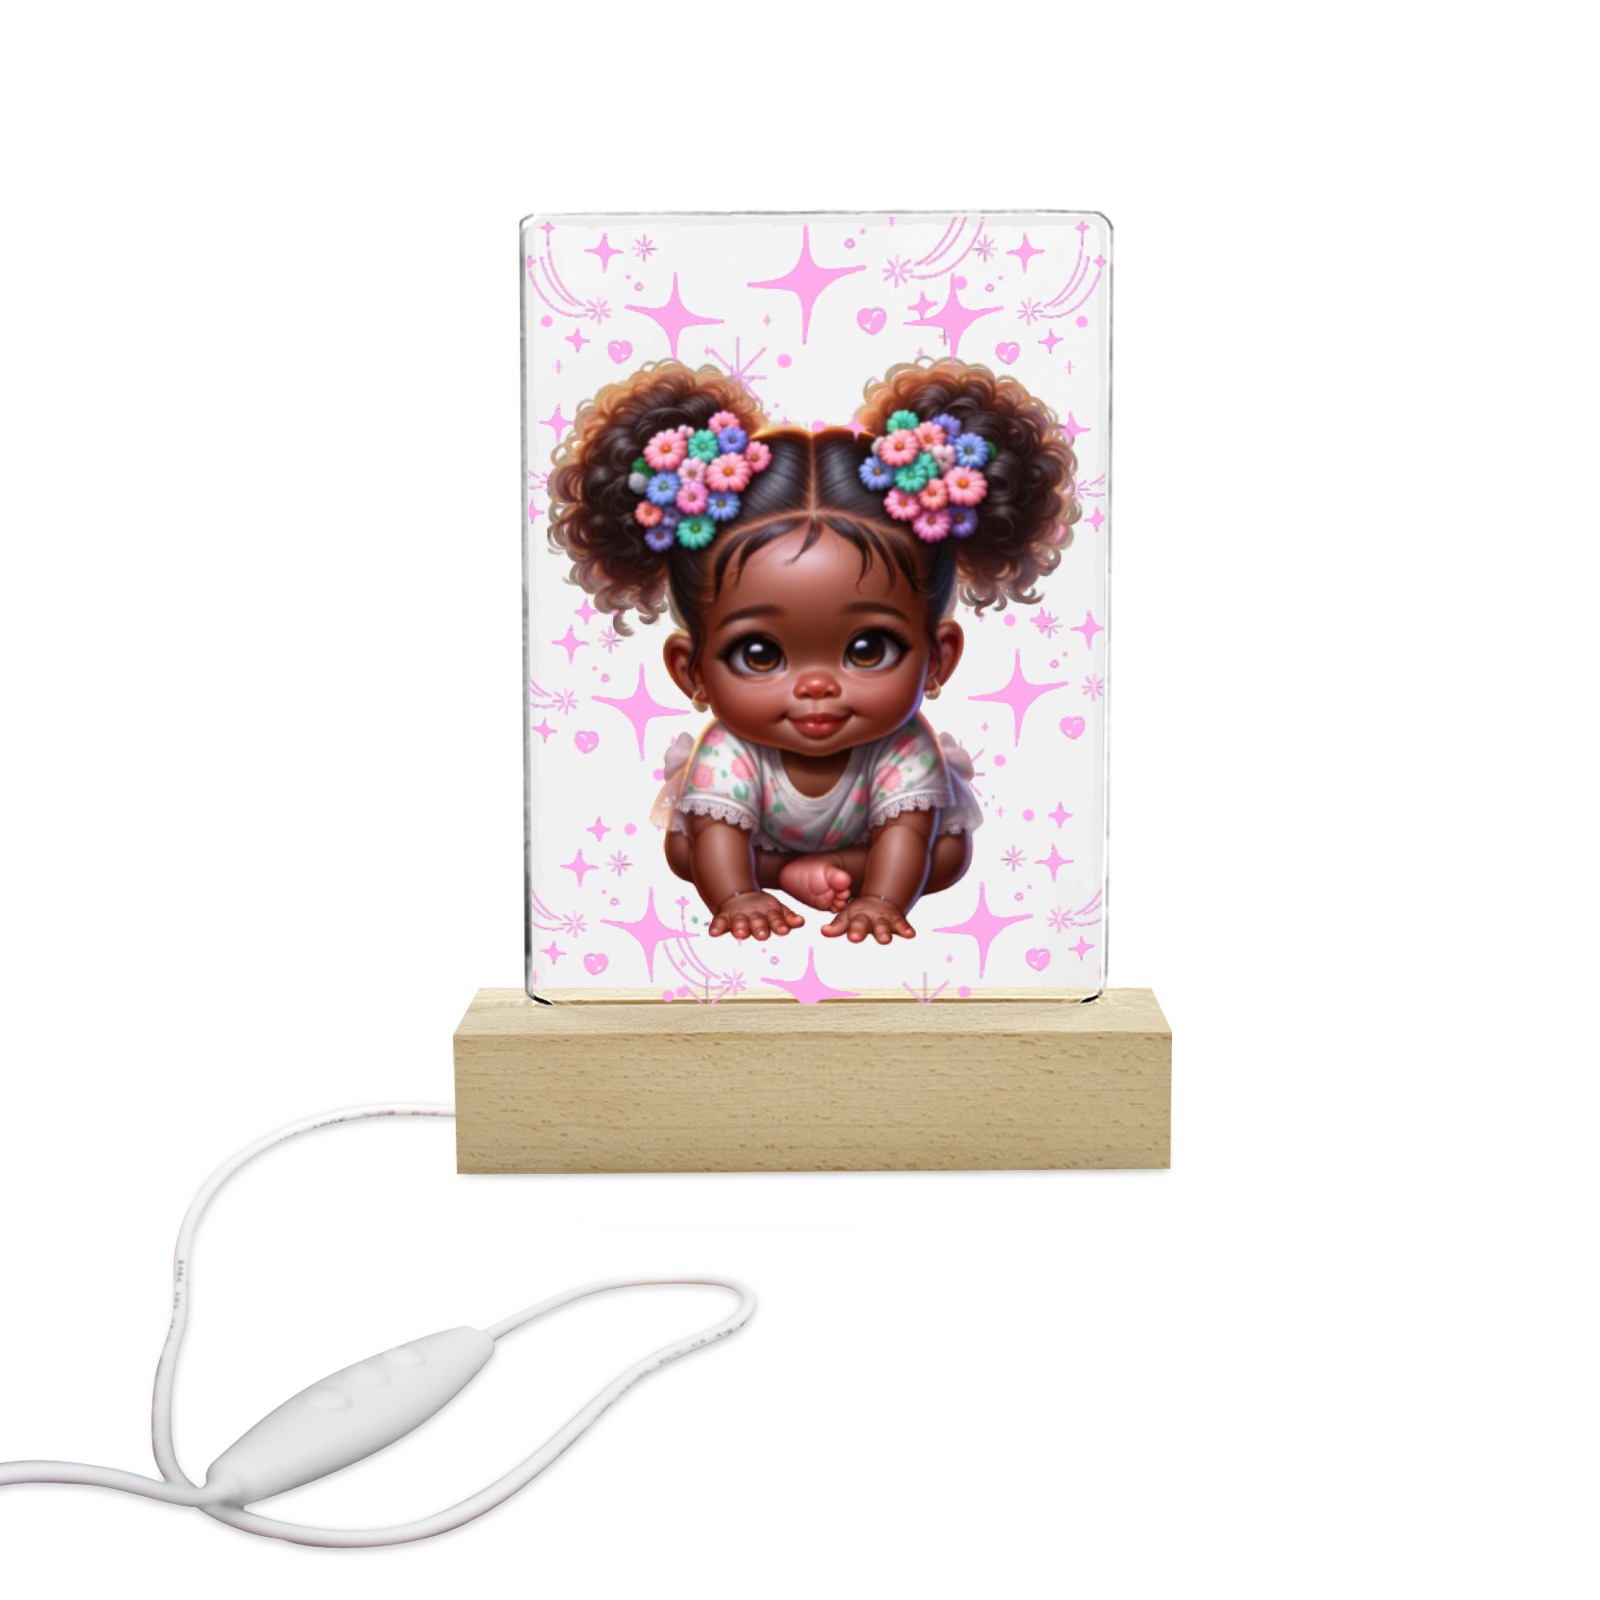 Baby Girl Nightlight Acrylic Photo Print with Colorful Light Square Base 5"x7.5"